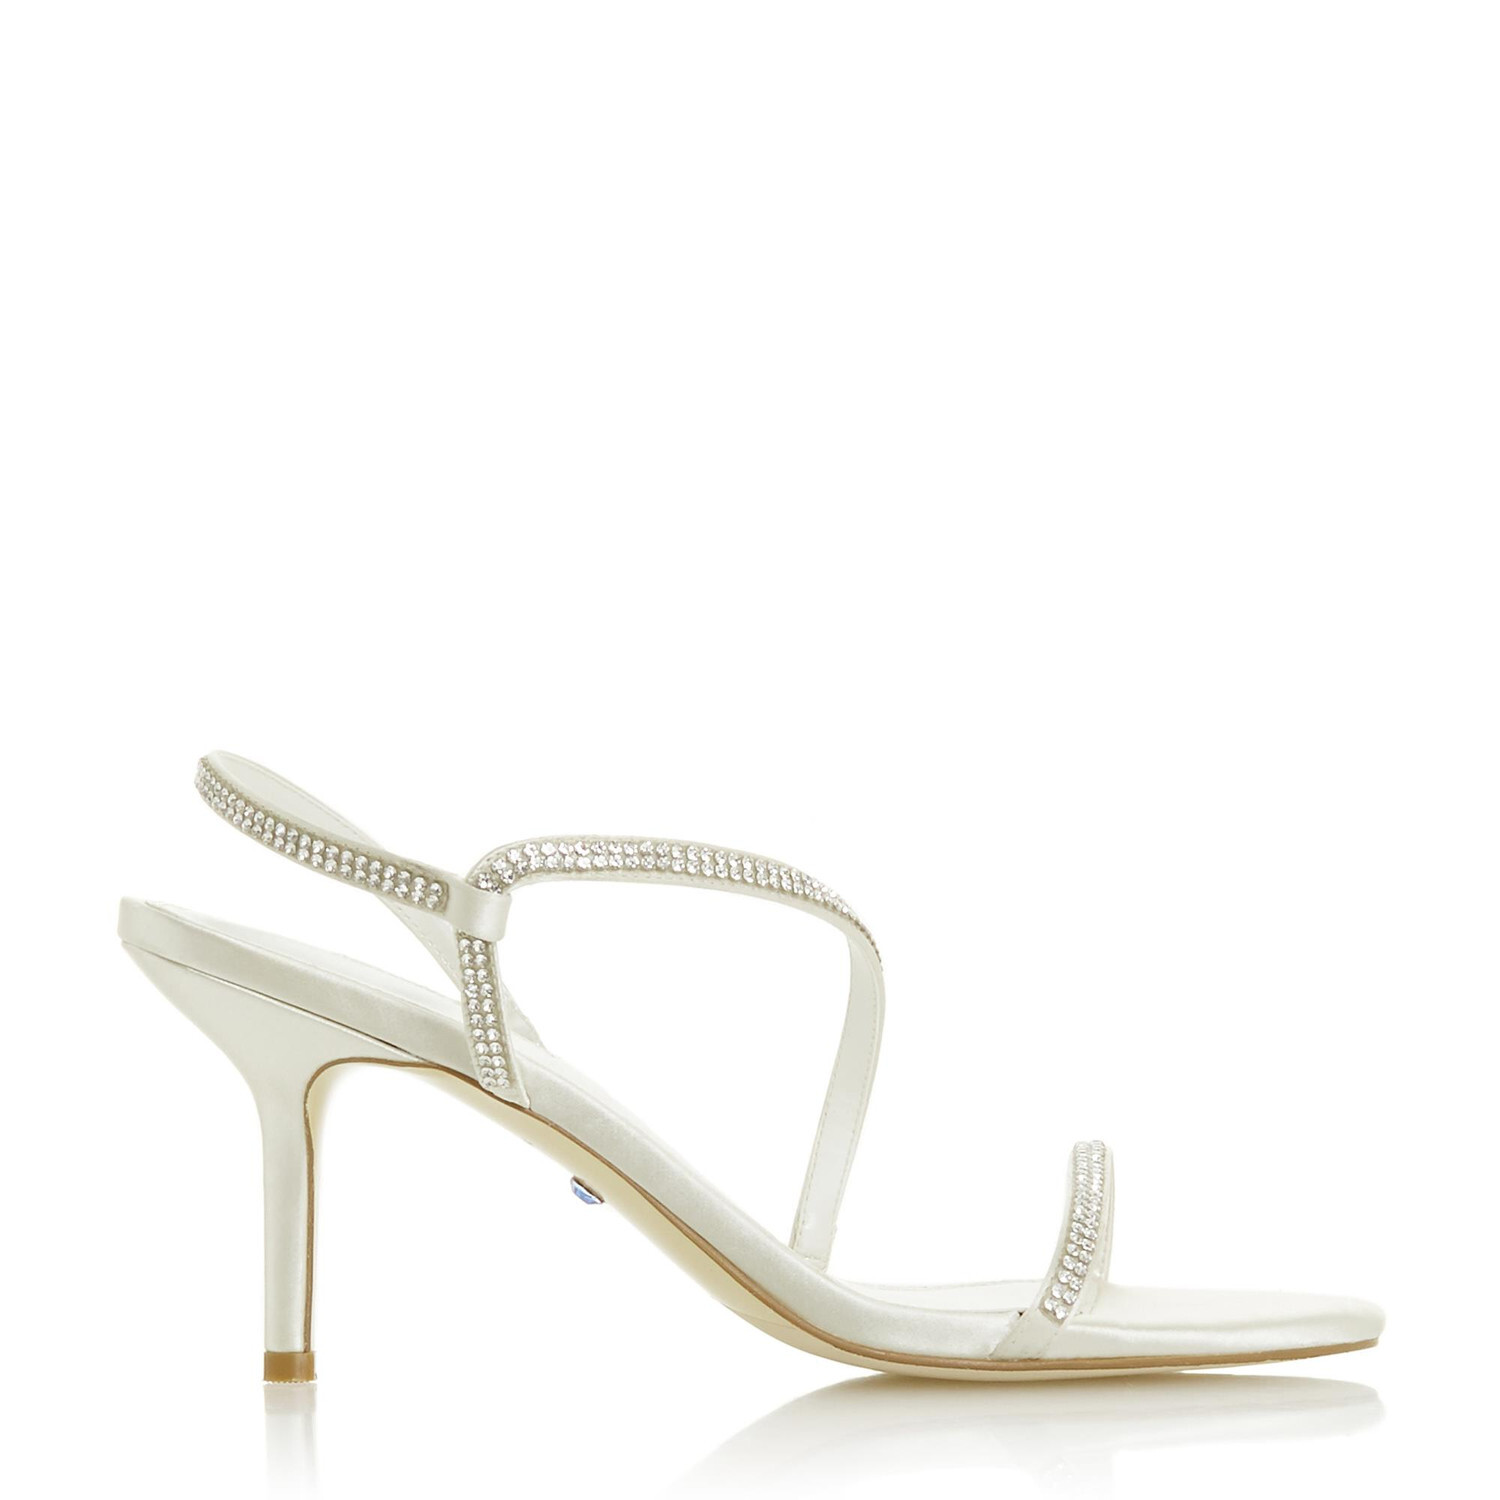 Marion Wedding Shoes from Dune London - hitched.co.uk